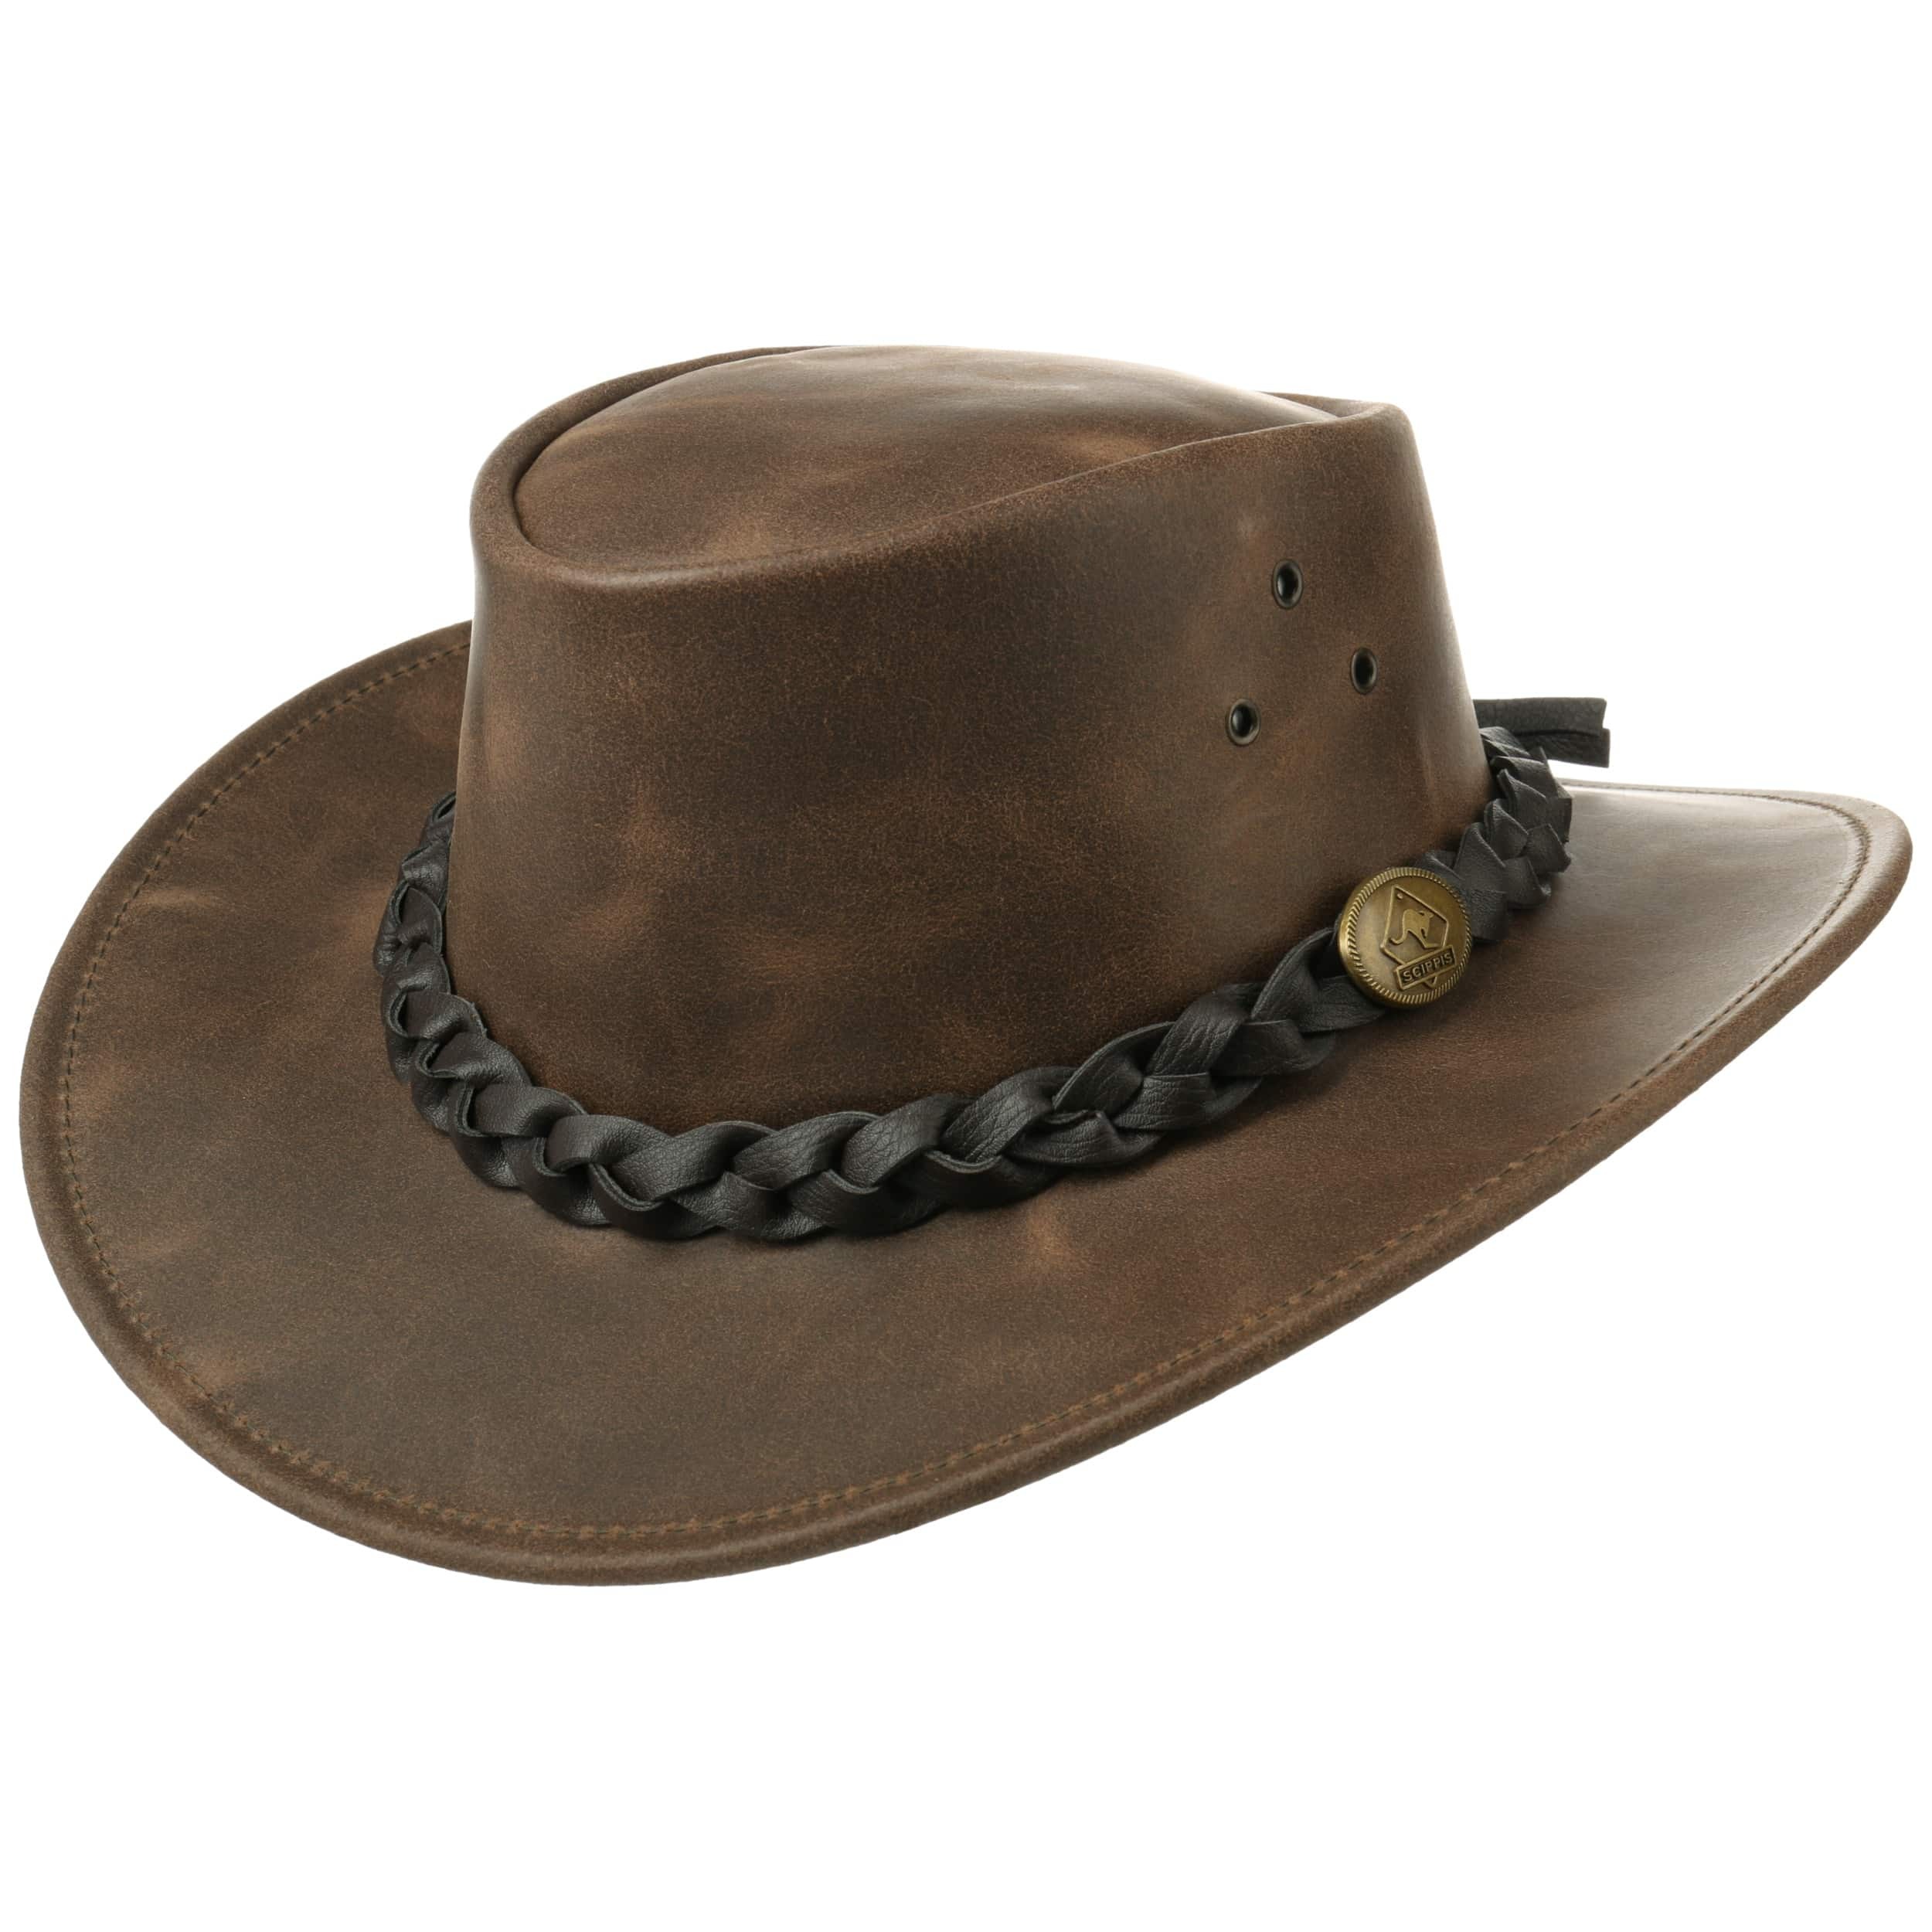 Traveller Leather Hat by Scippis - 83,95